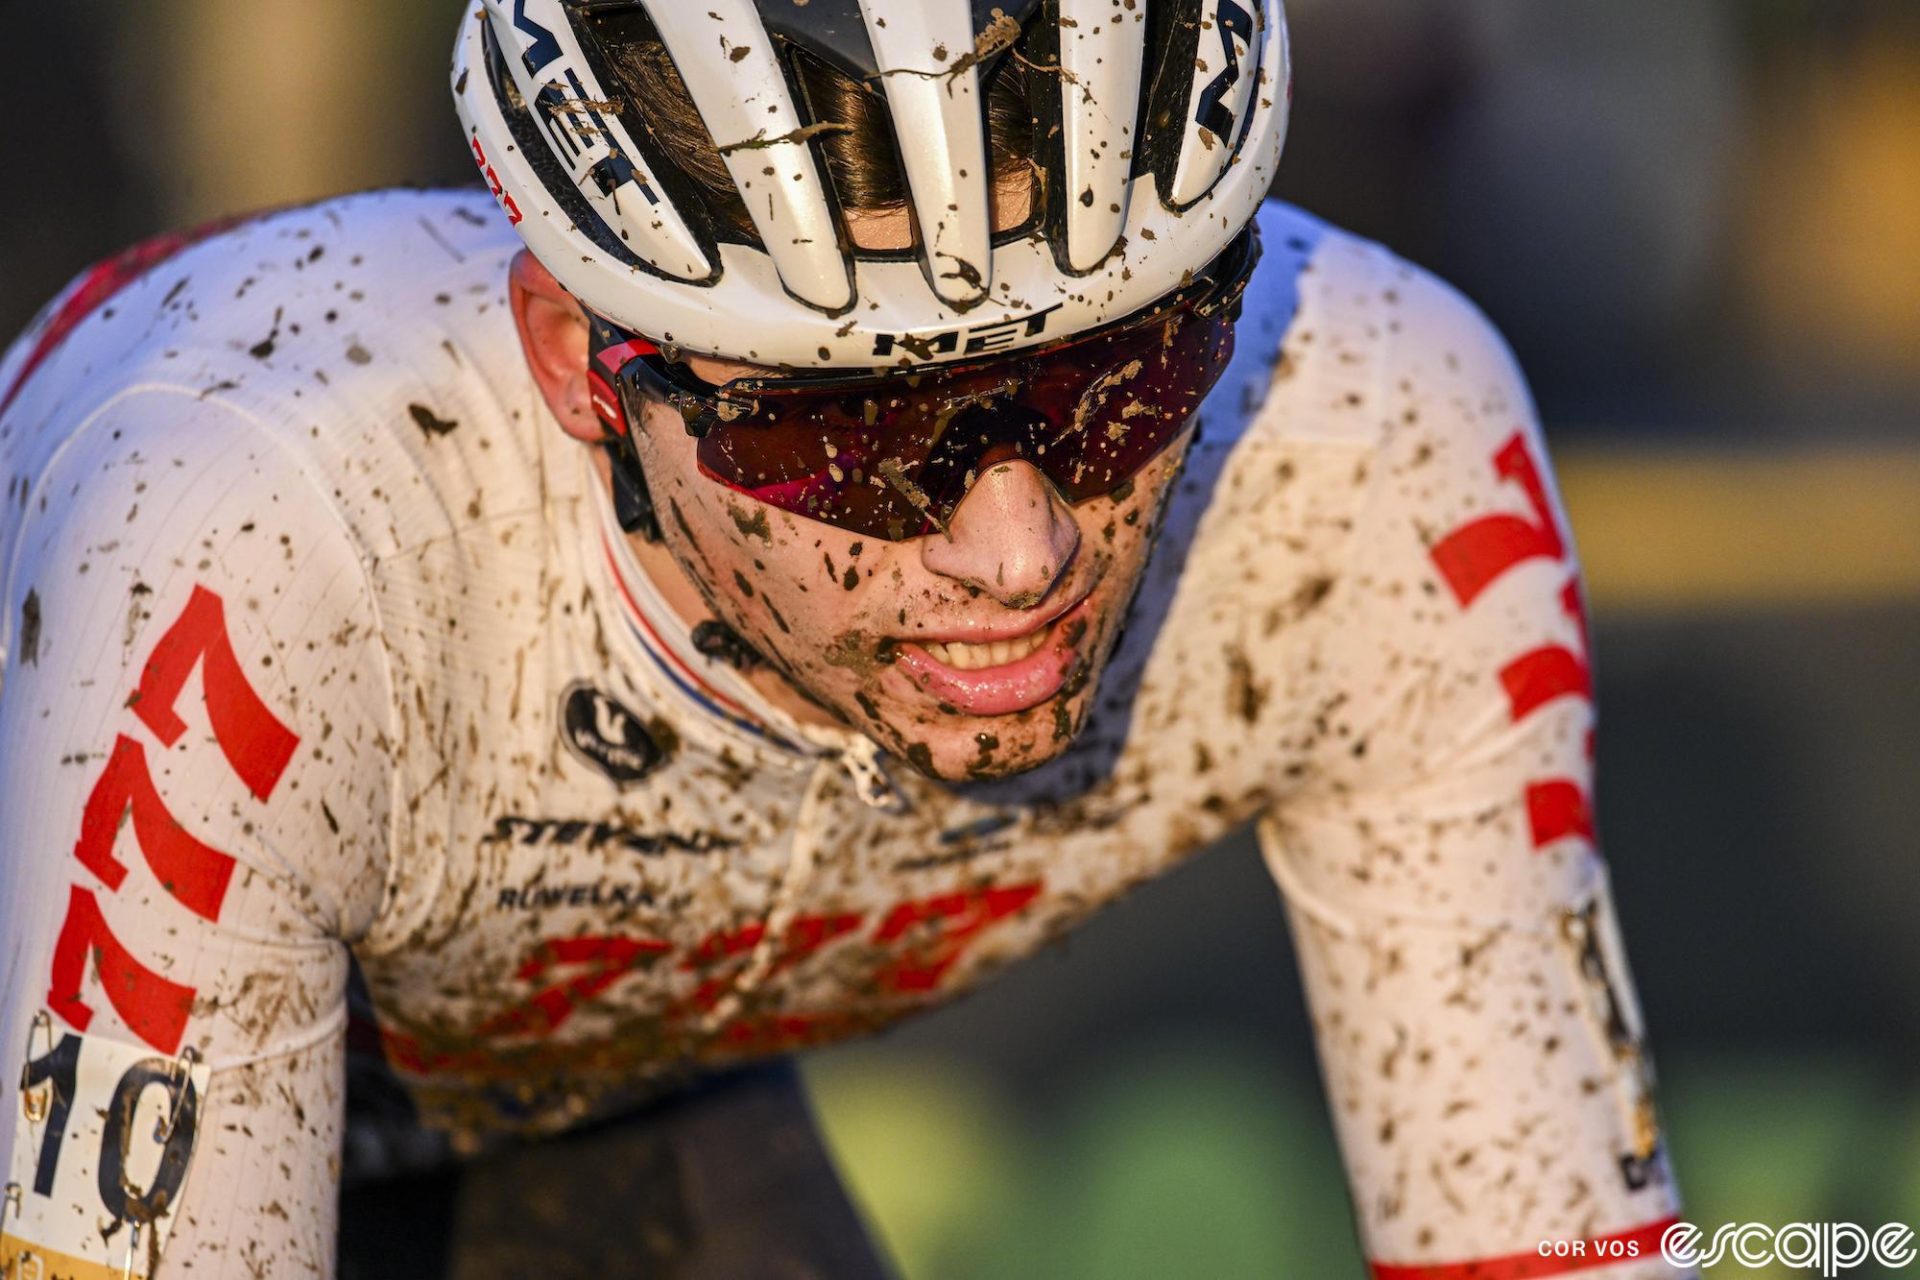 Cameron Mason races at the Superprestige round at Boom in 2023. He's shown close up, his face and white British champion's kit splattered in mud. He's wearing wraparound shades and has an intense look on his face and is lit in soft afternoon glow.